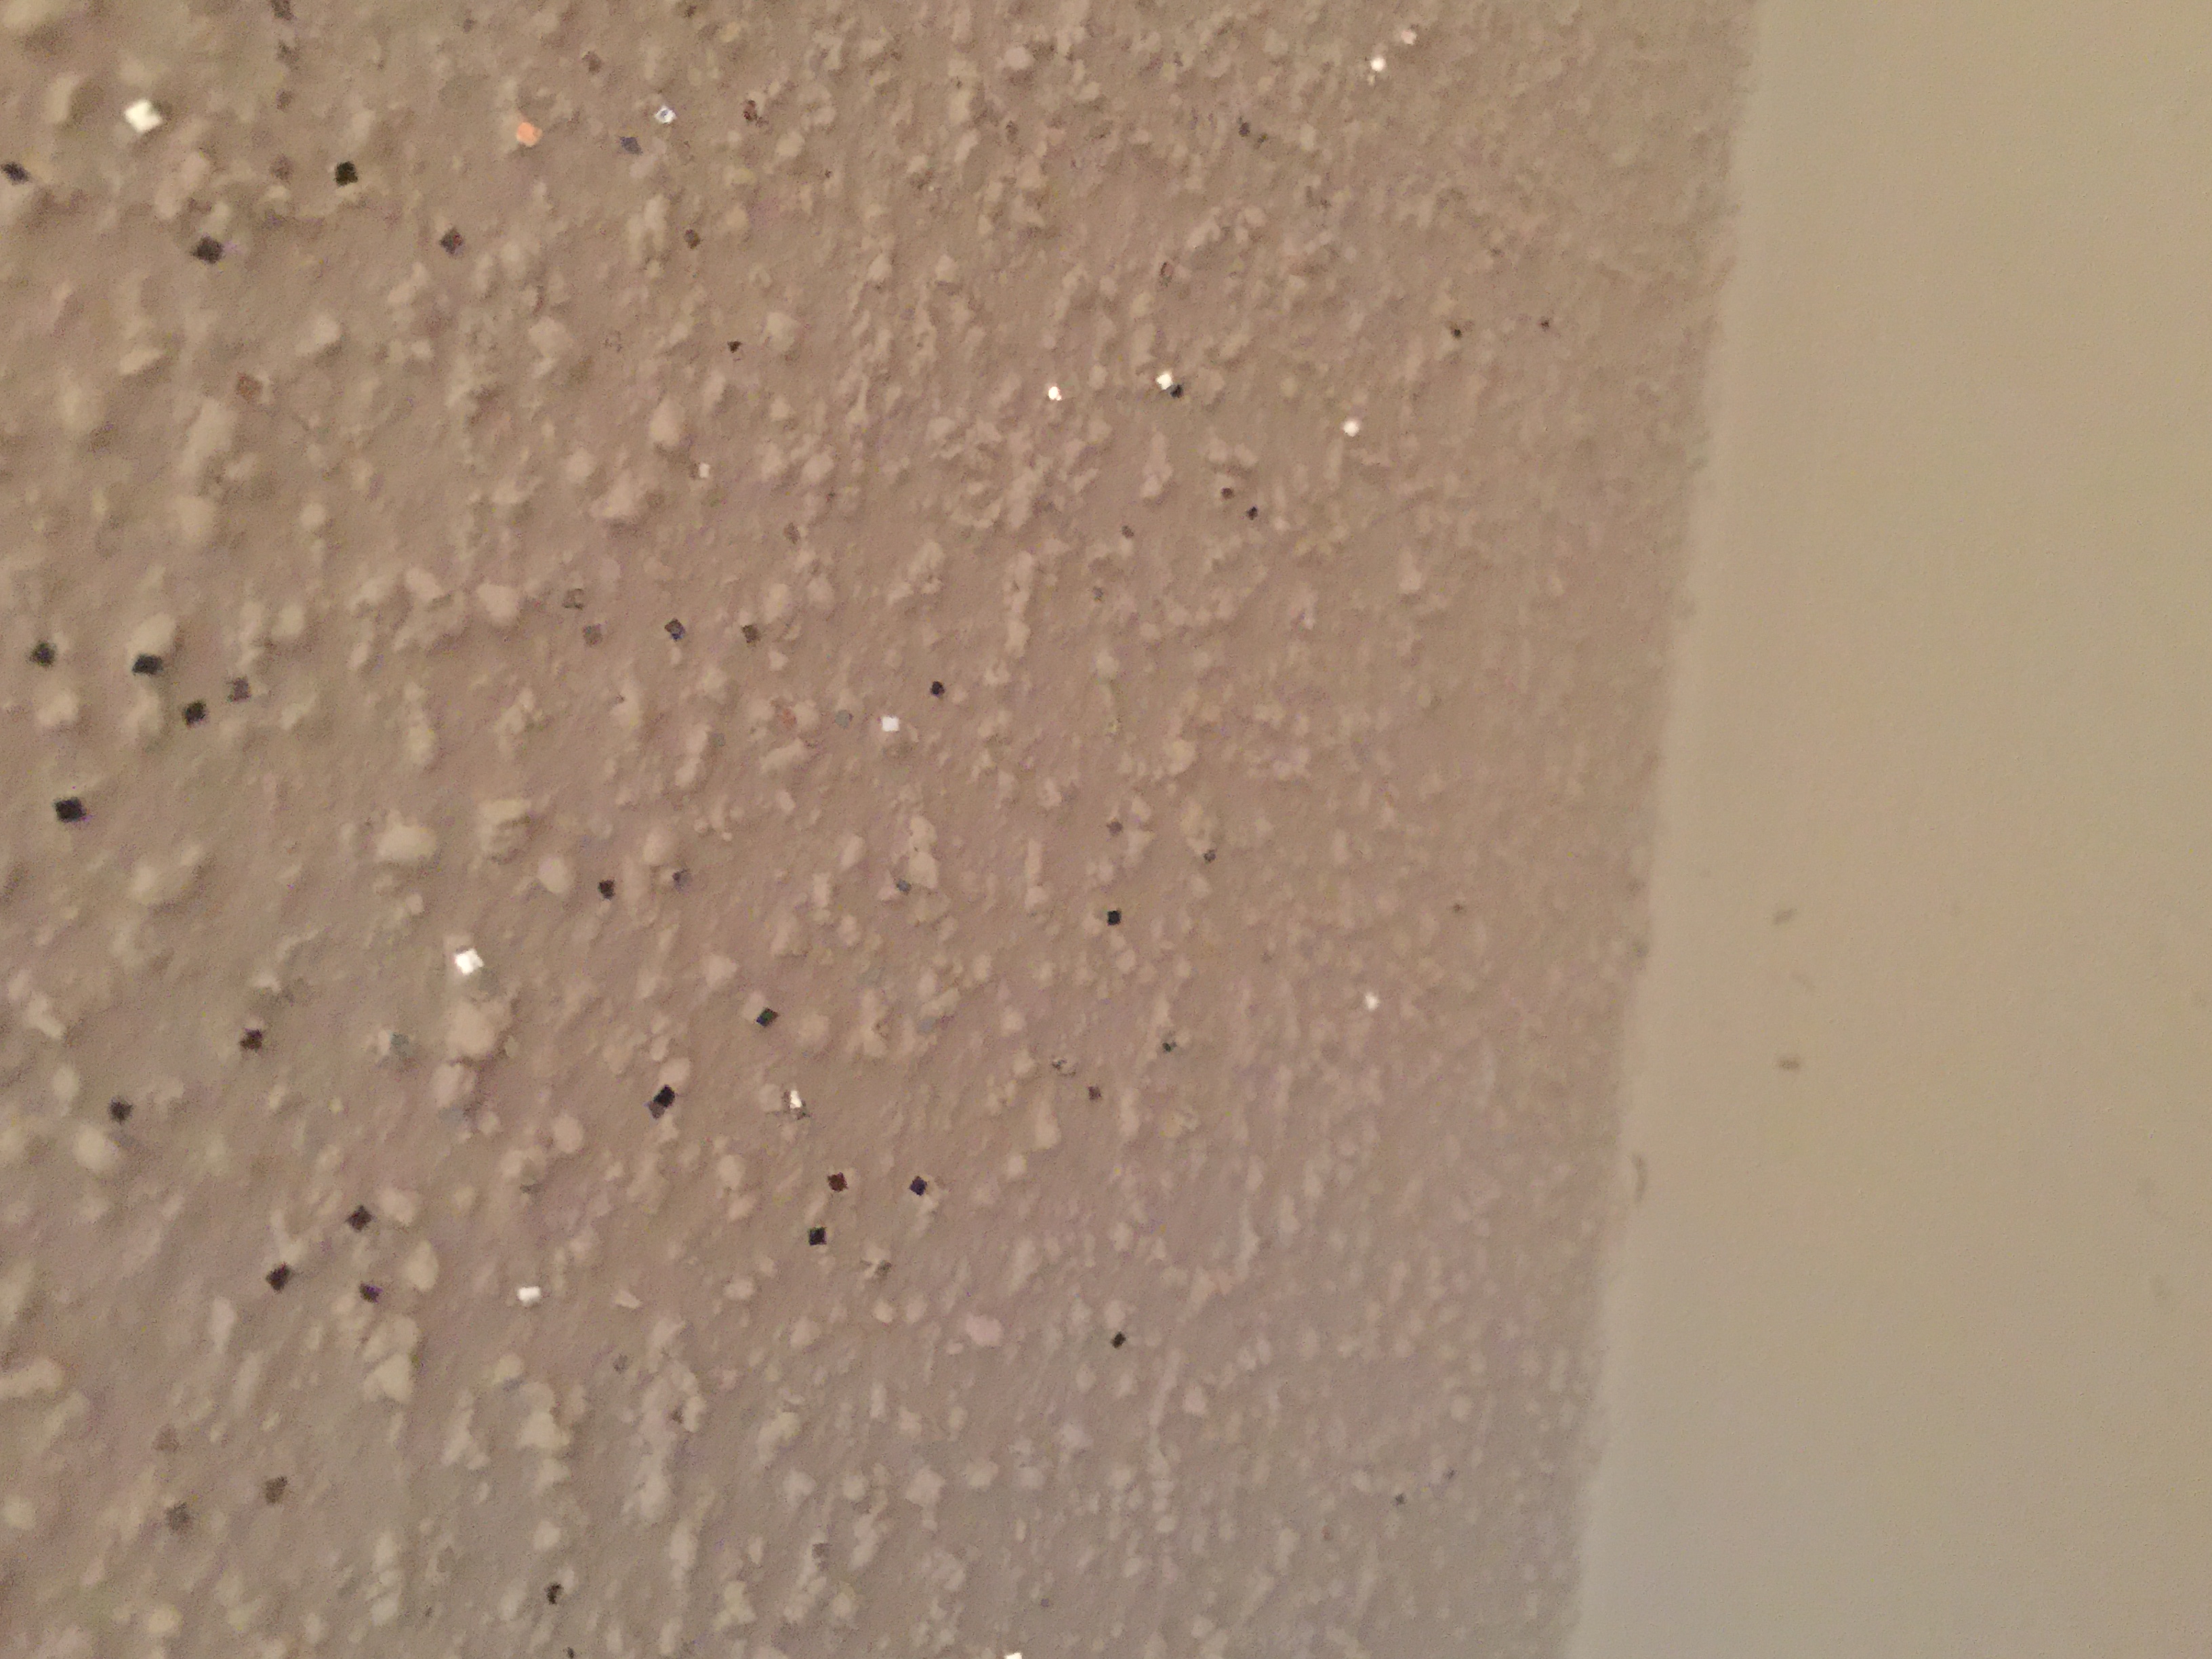 I Need Some Options For Removing Covering Popcorn Ceiling